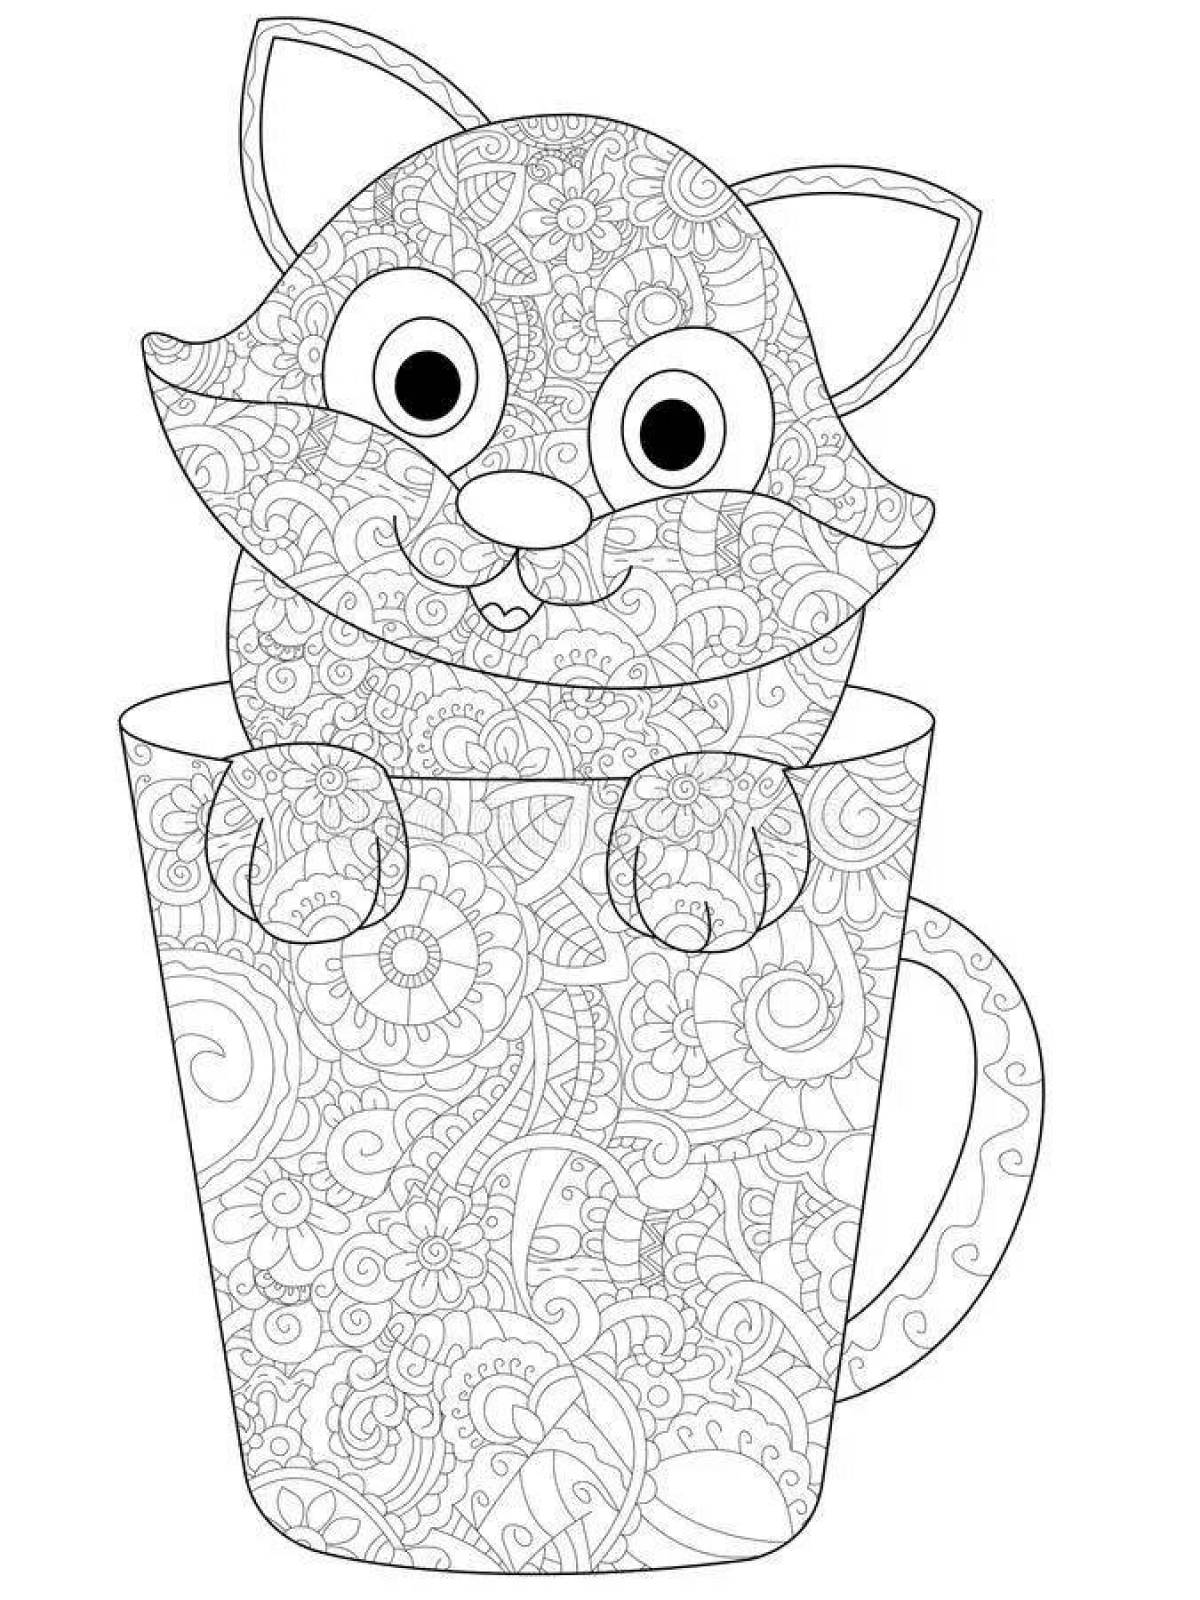 Coloring page mischievous cat in a mug